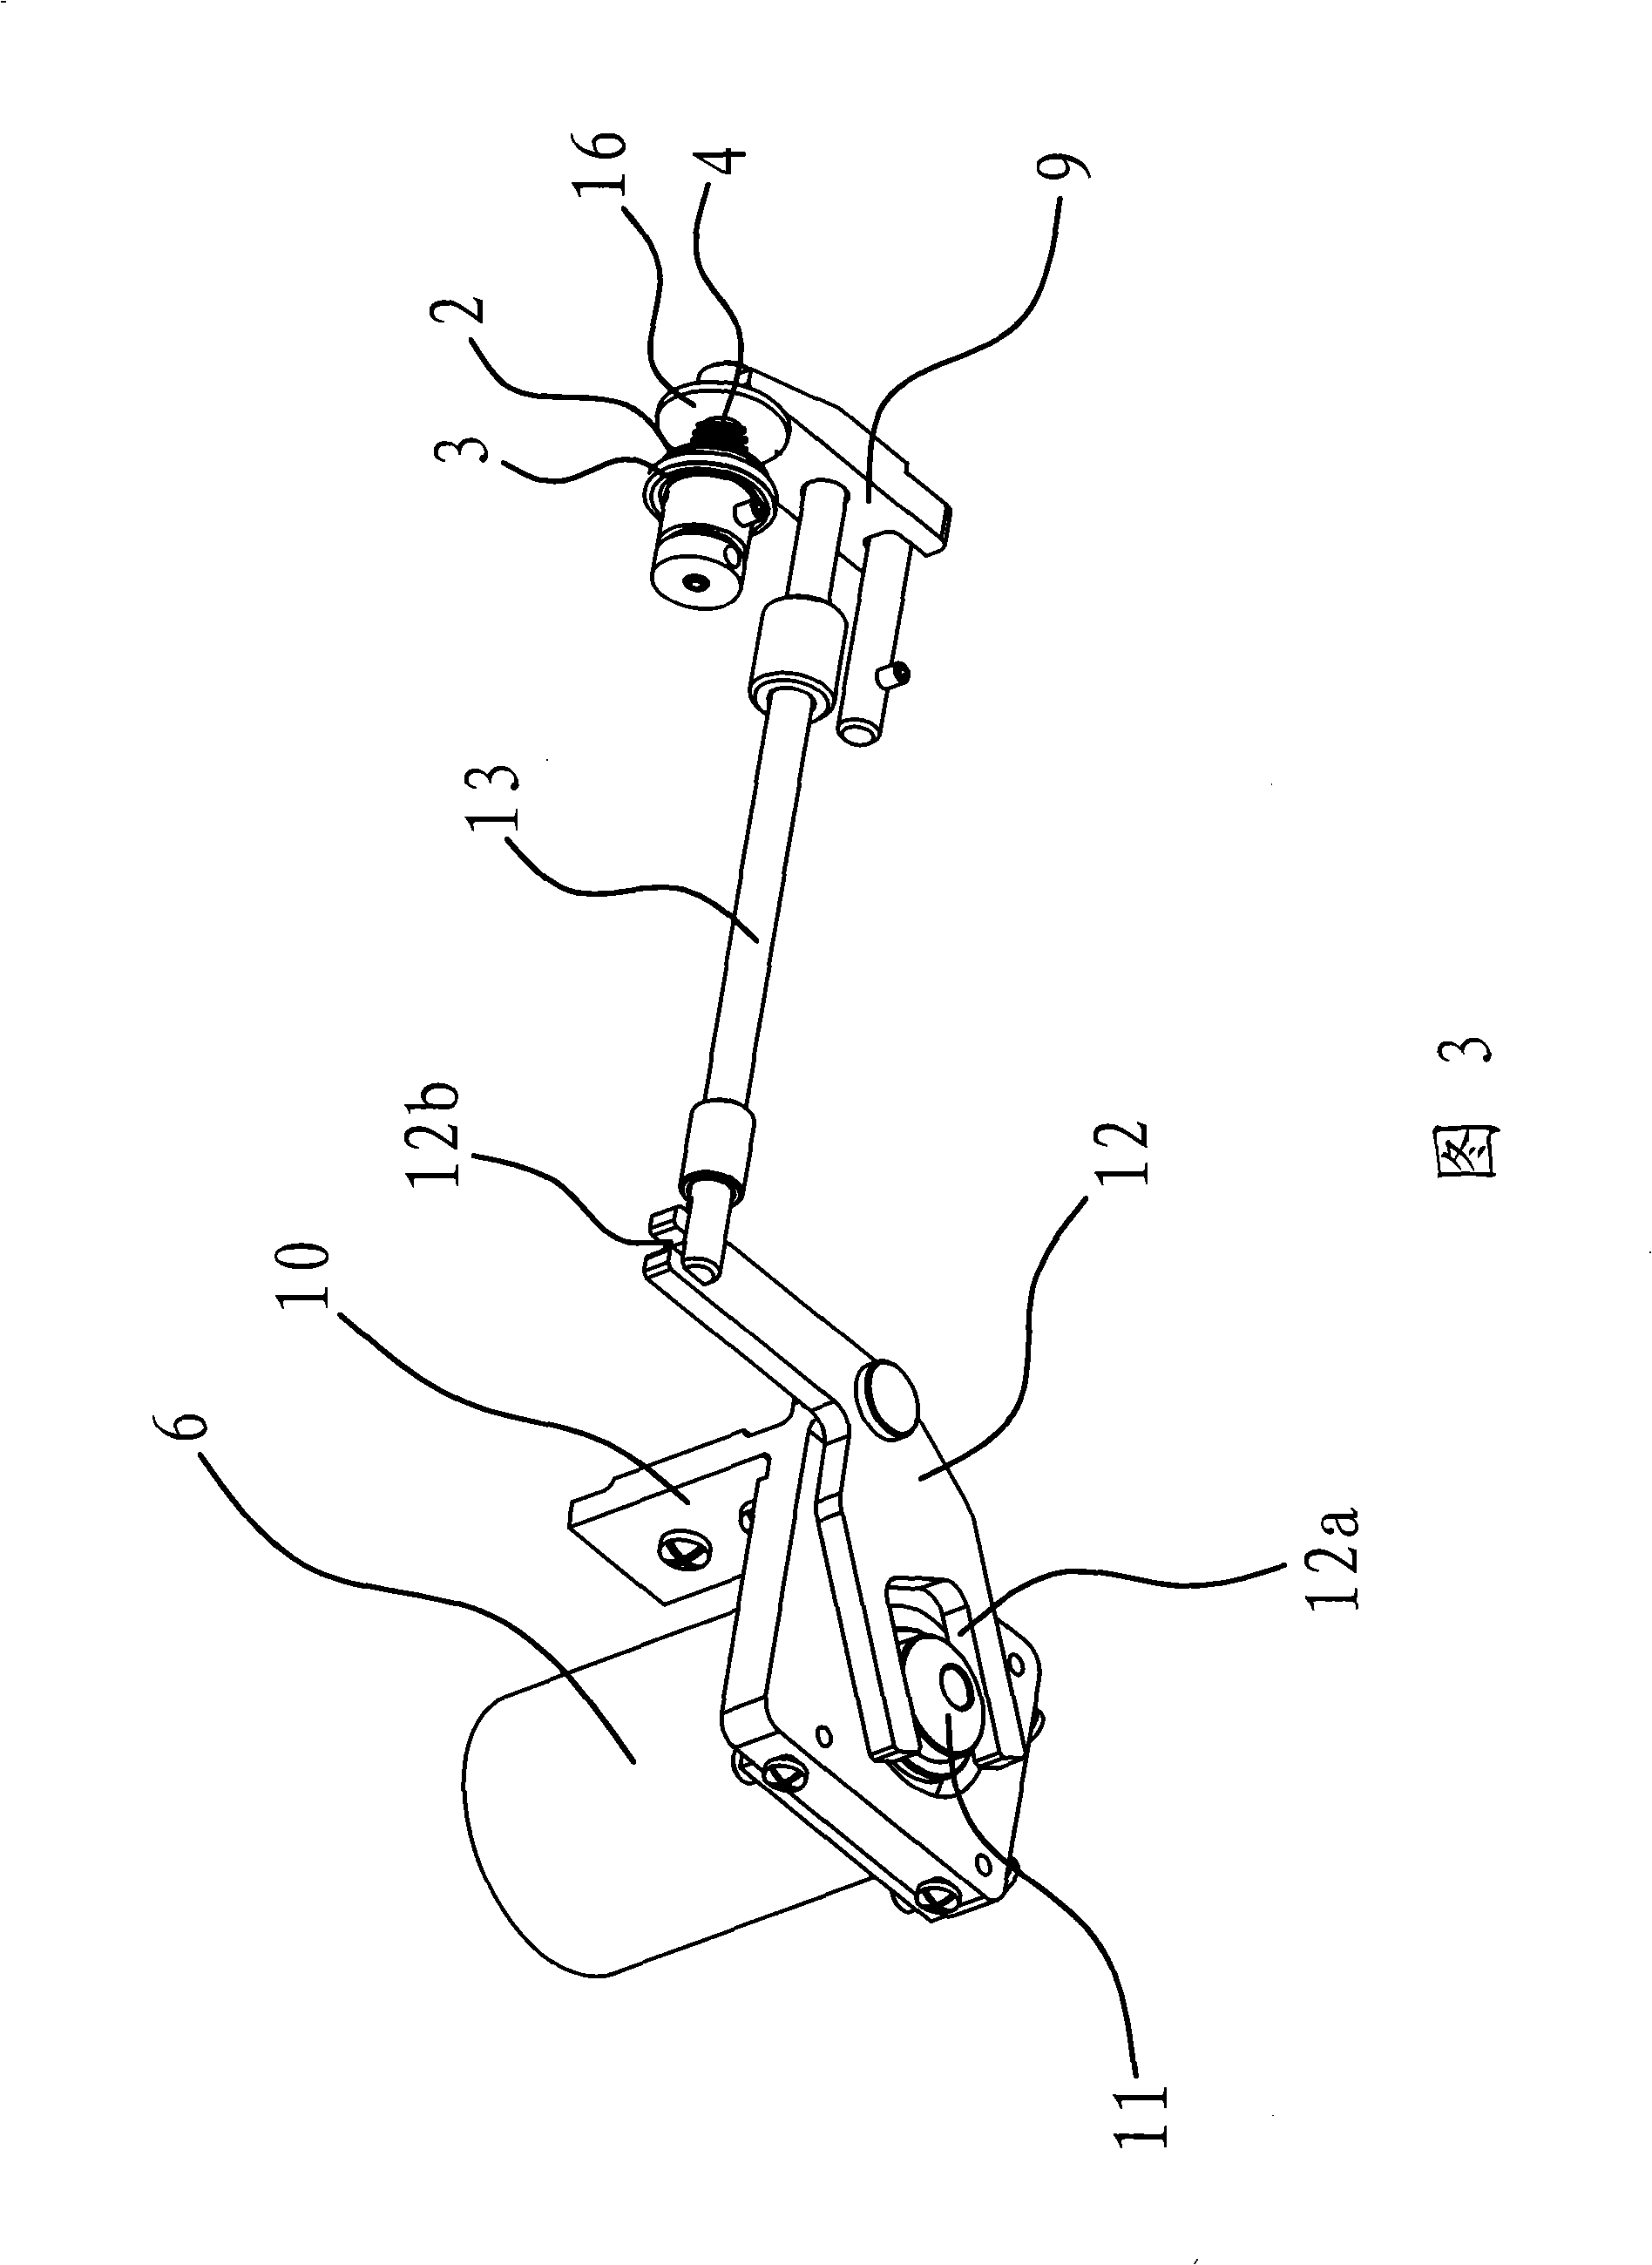 Control device for yarn trapper in sewing machine